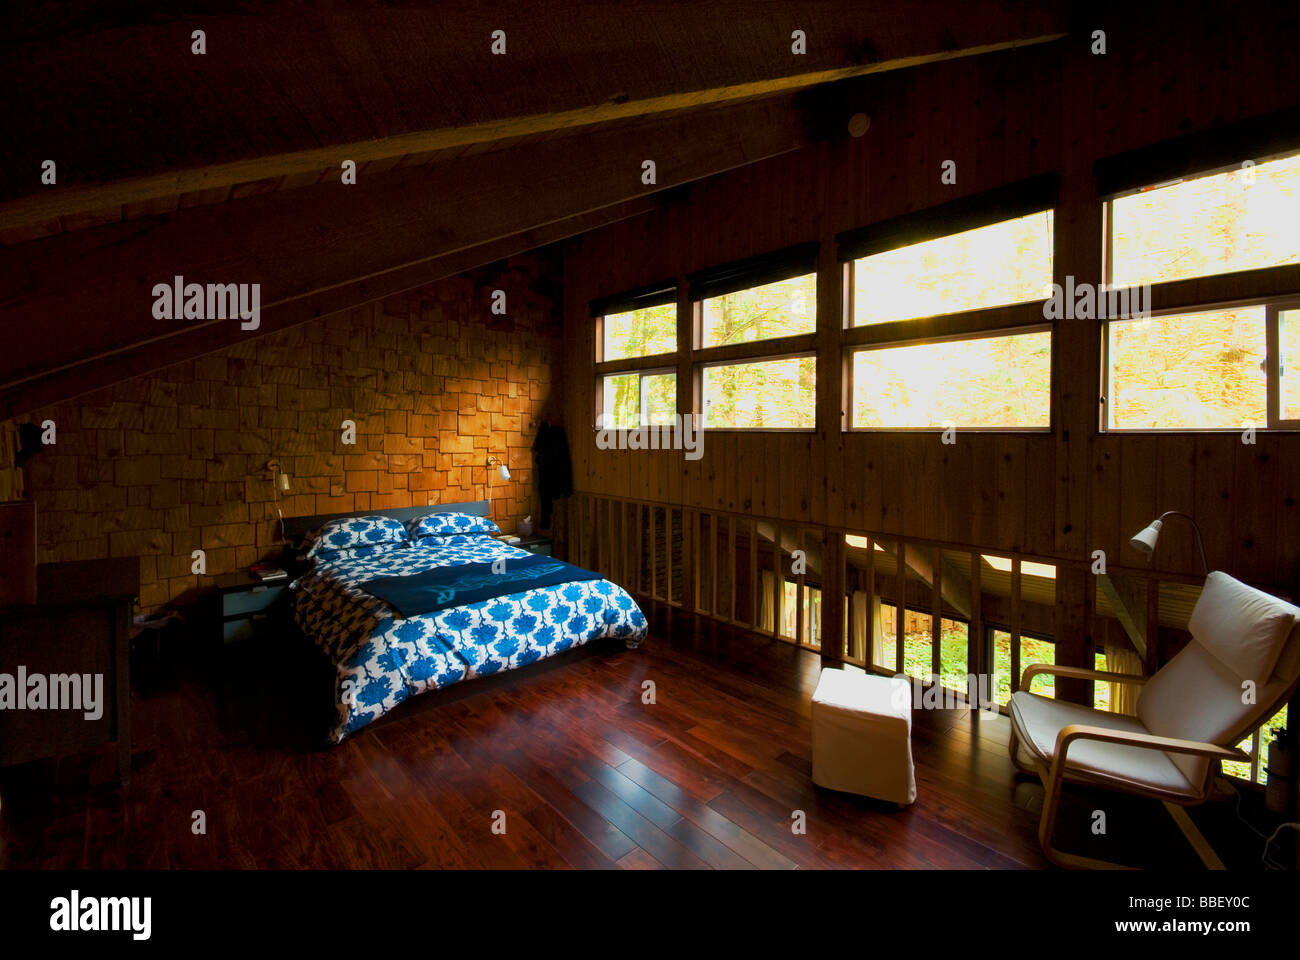 The loft bedroom of a cabin Stock Photo